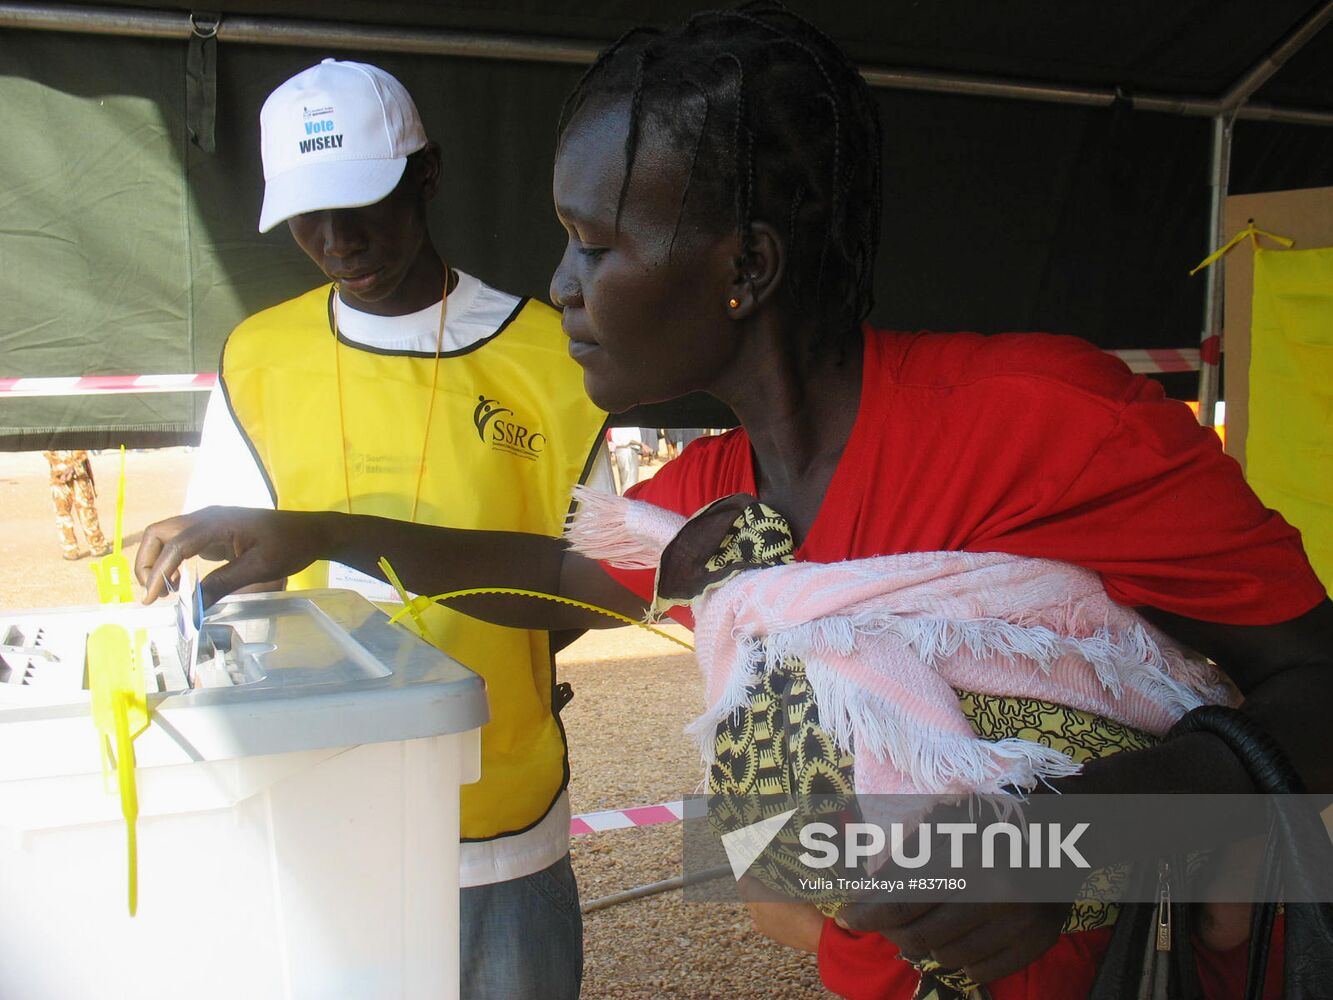 Referendum on independence of Southern Sudan